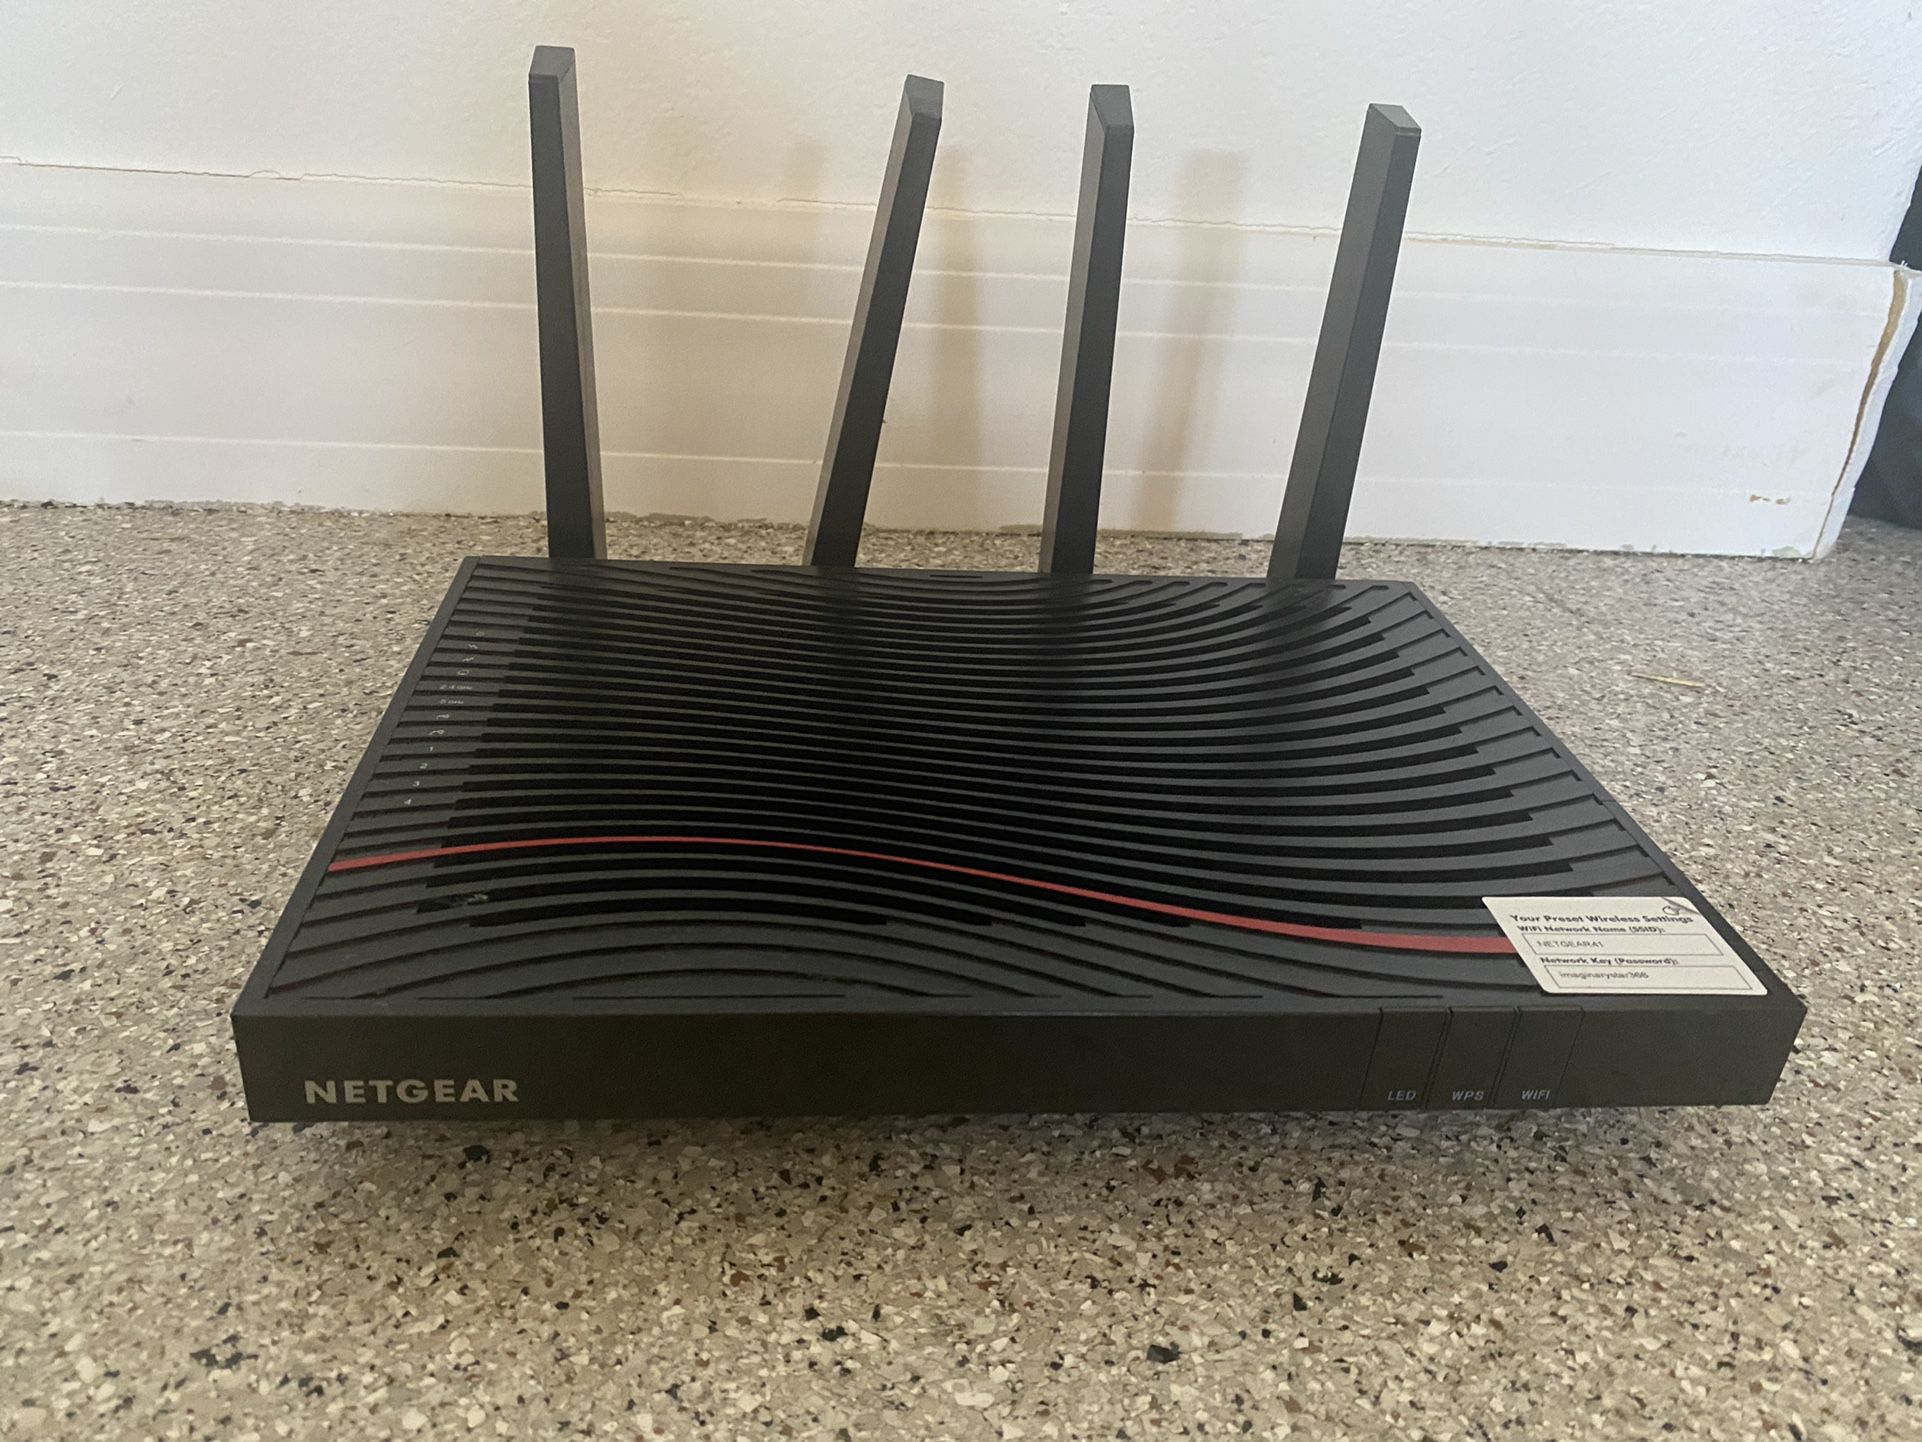 NETGEAR - Nighthawk AC3200 Wi-Fi Router with DOCSIS 3.1 Cable Modem